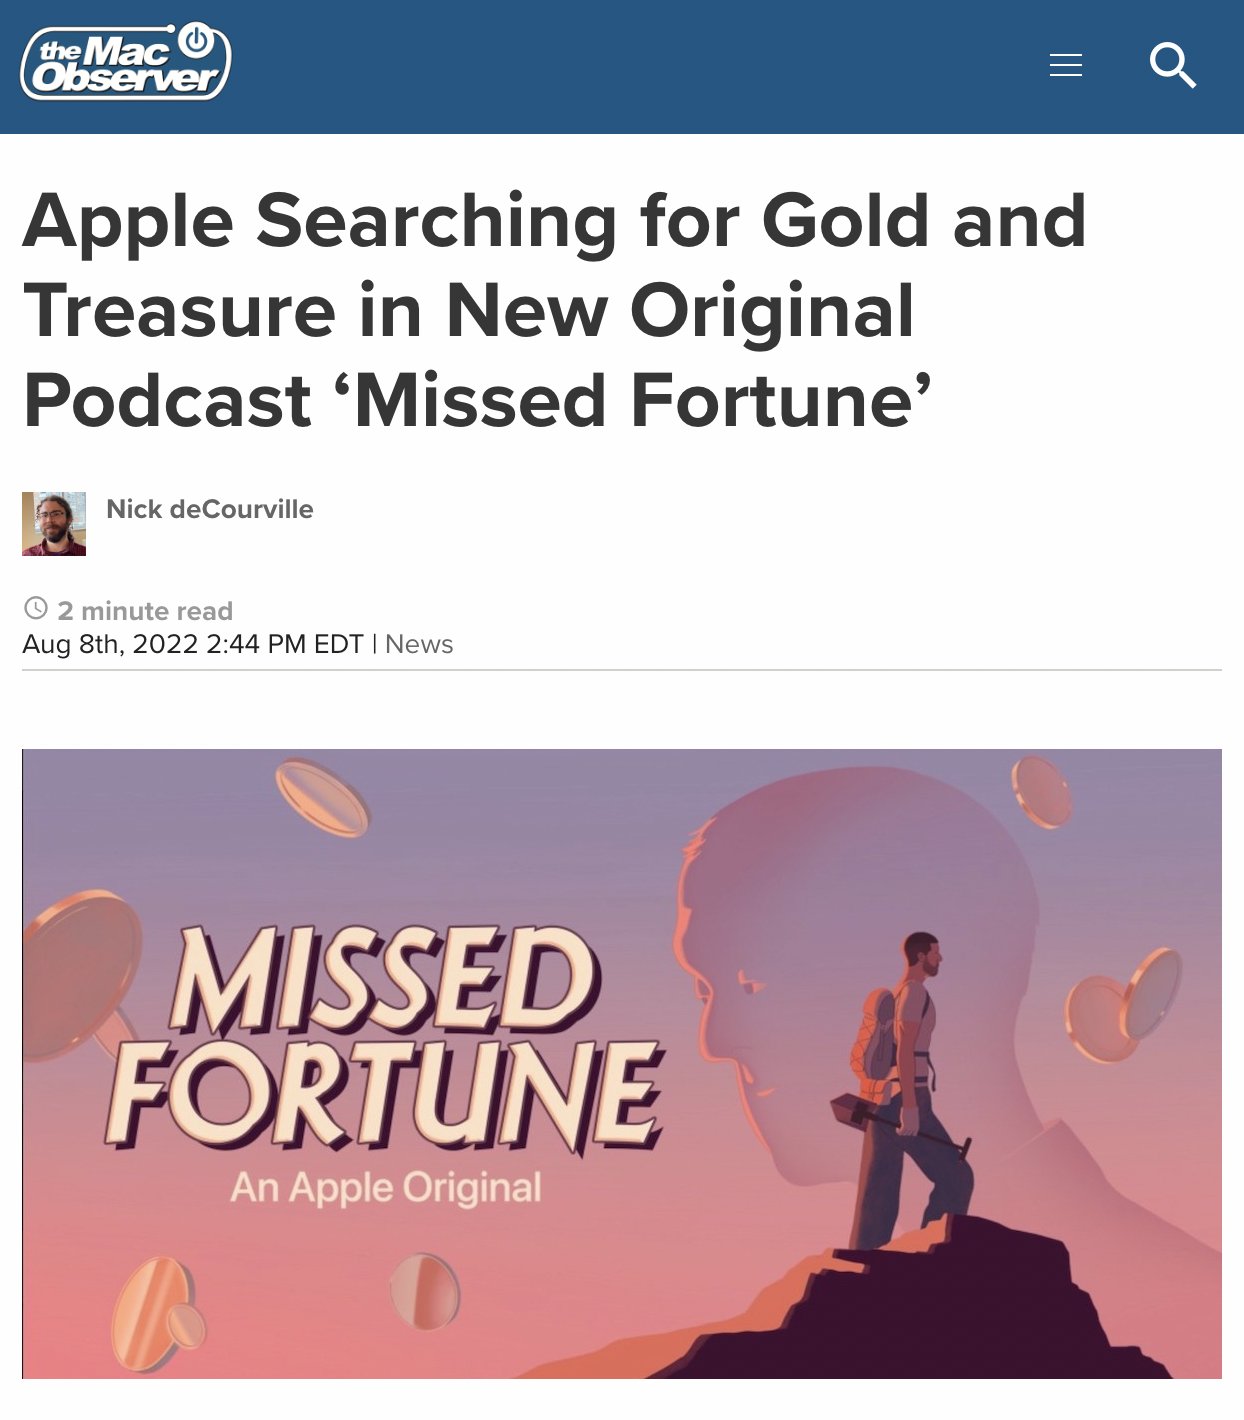 Apple Podcast Missed Fortune